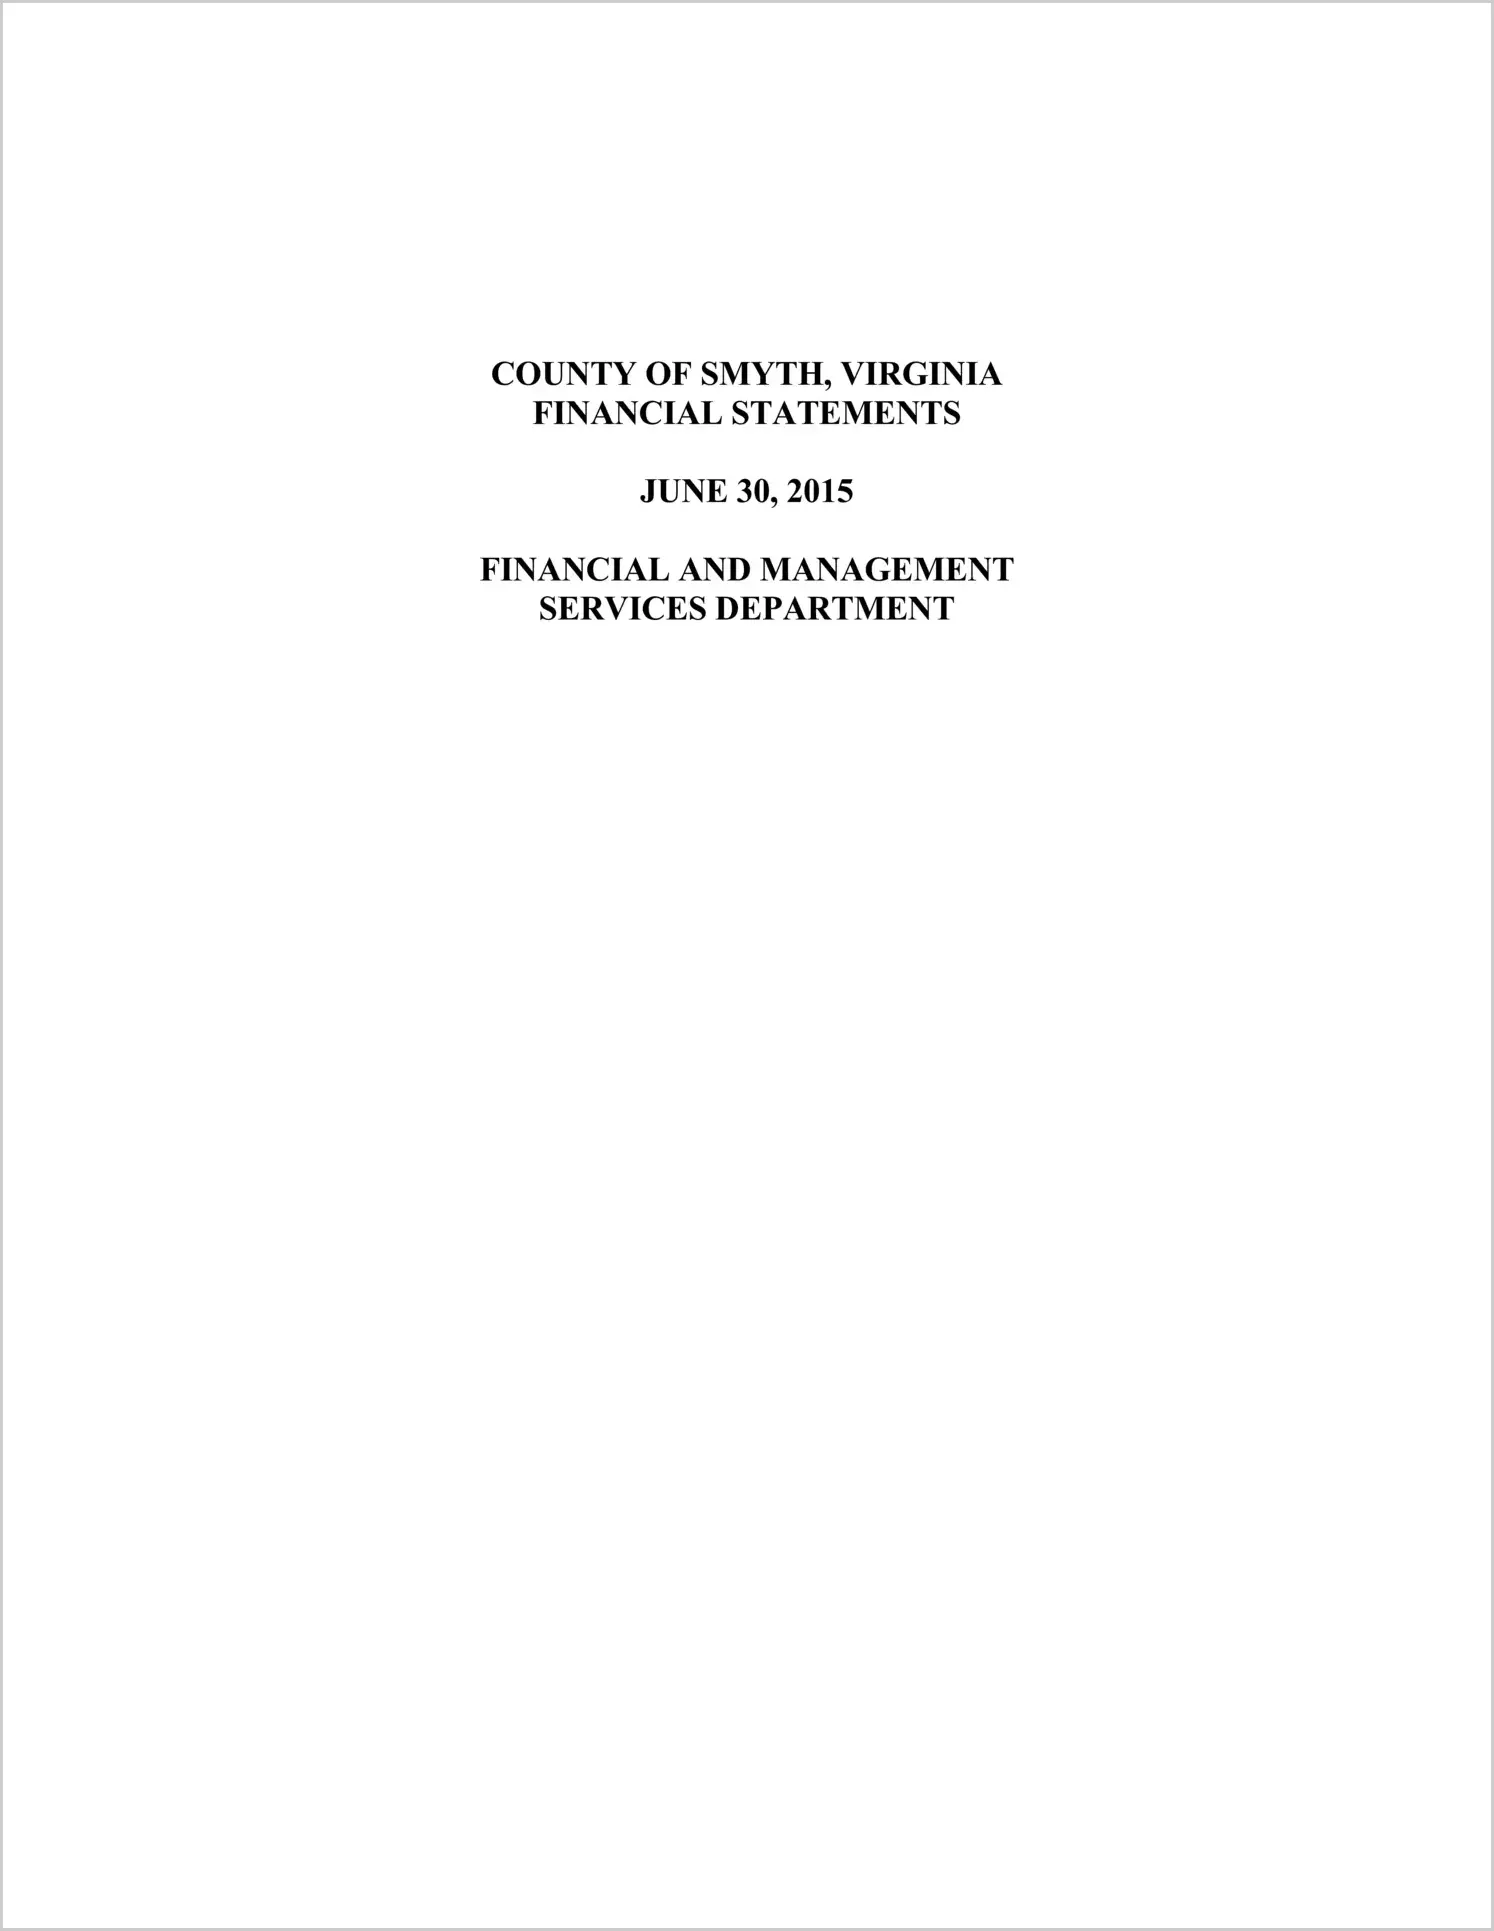 2015 Annual Financial Report for County of Smyth